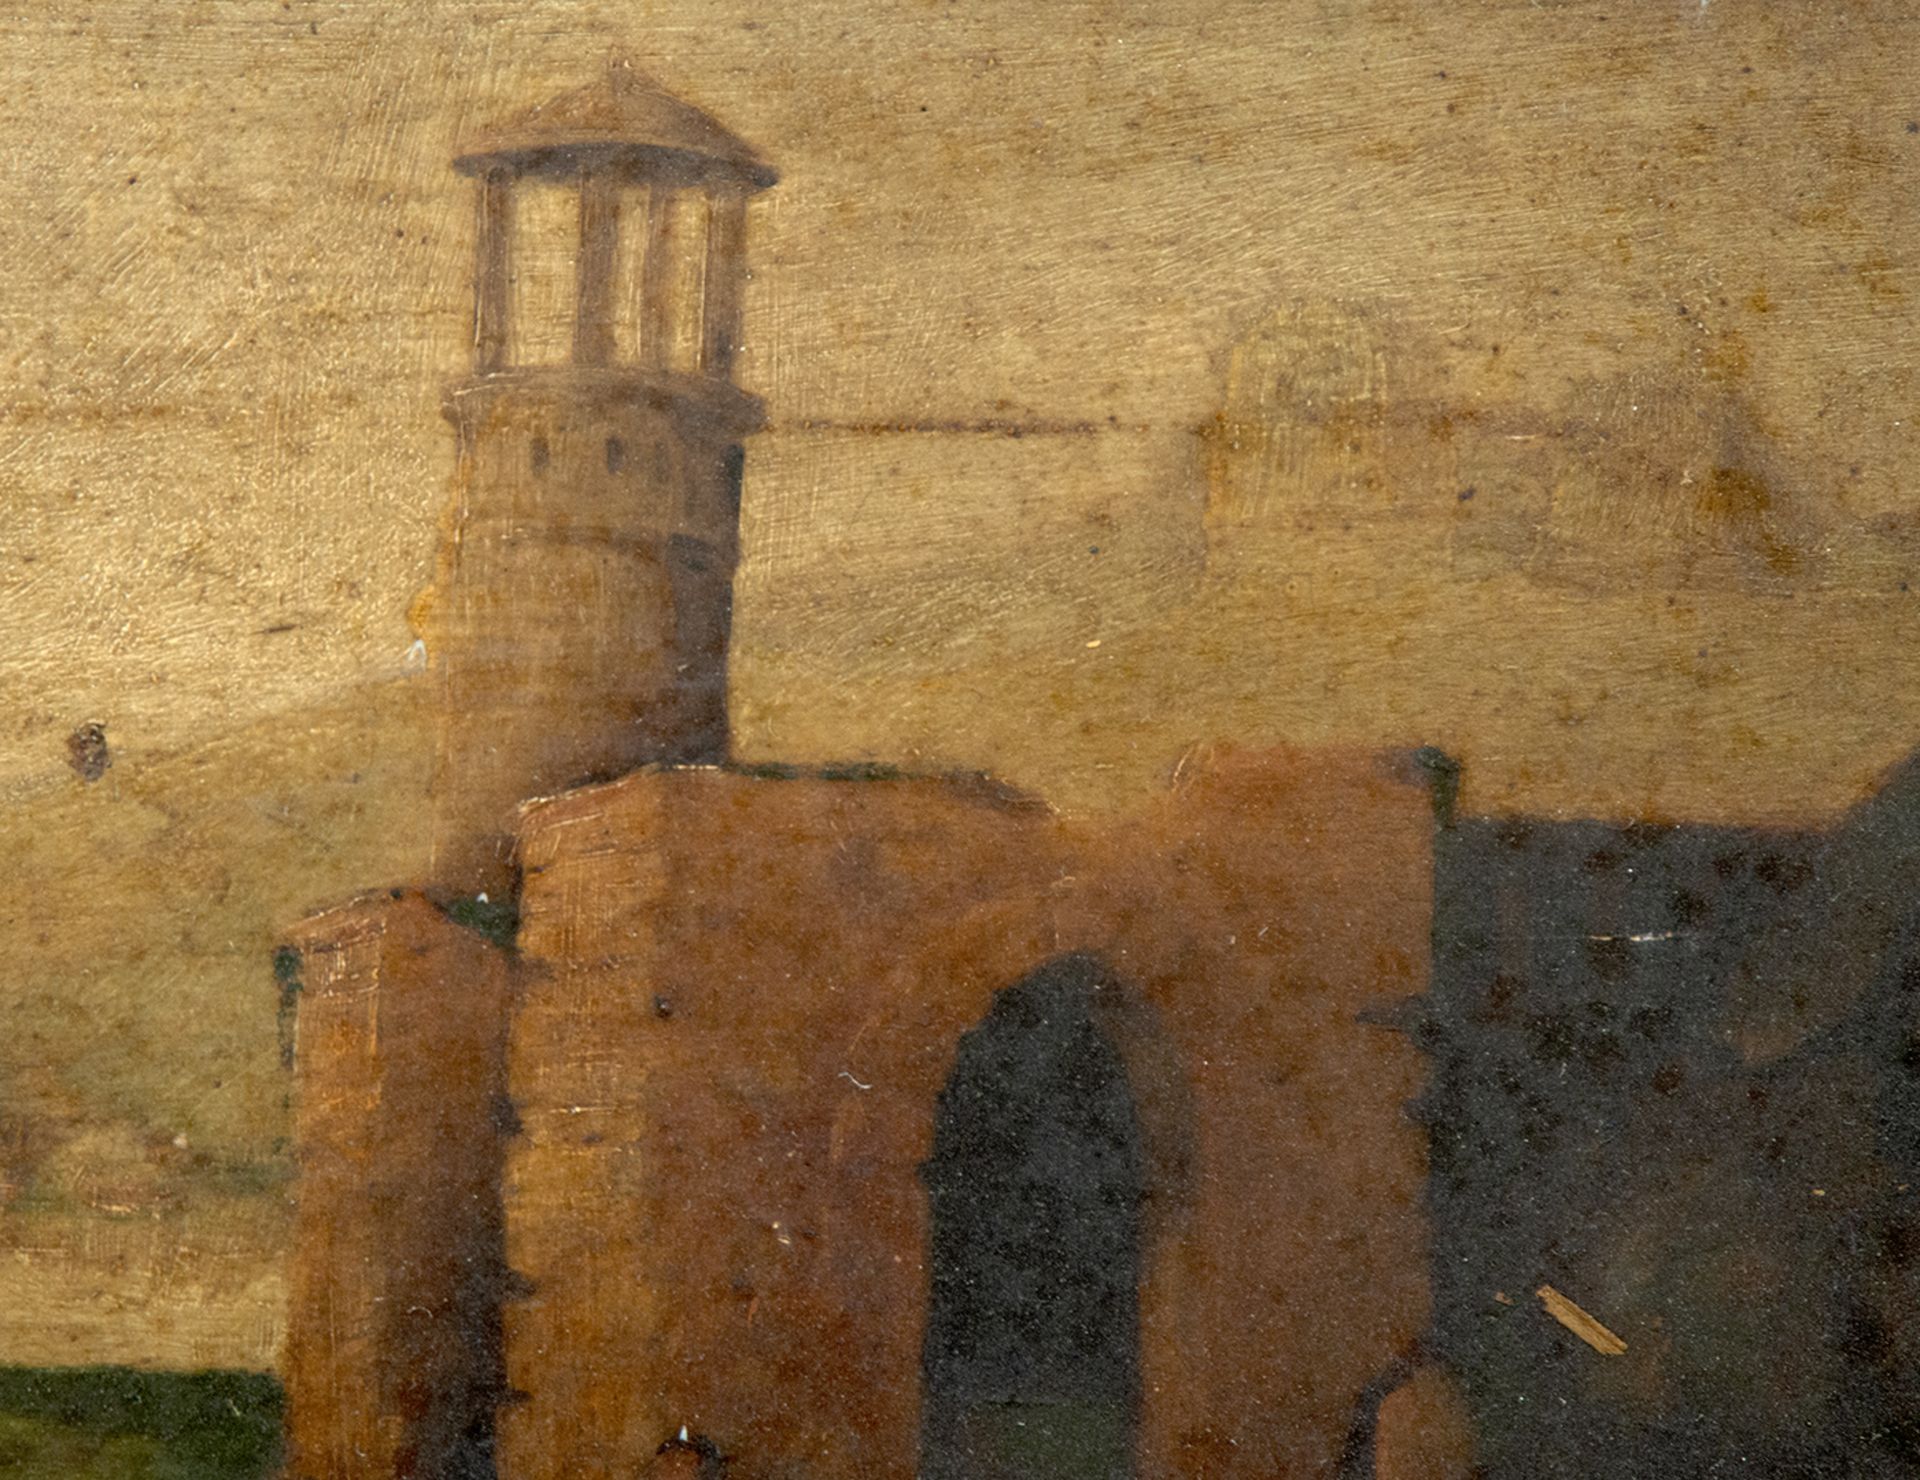 Pair of Landscapes with Whimsies, 19th century, Italy - Image 6 of 7